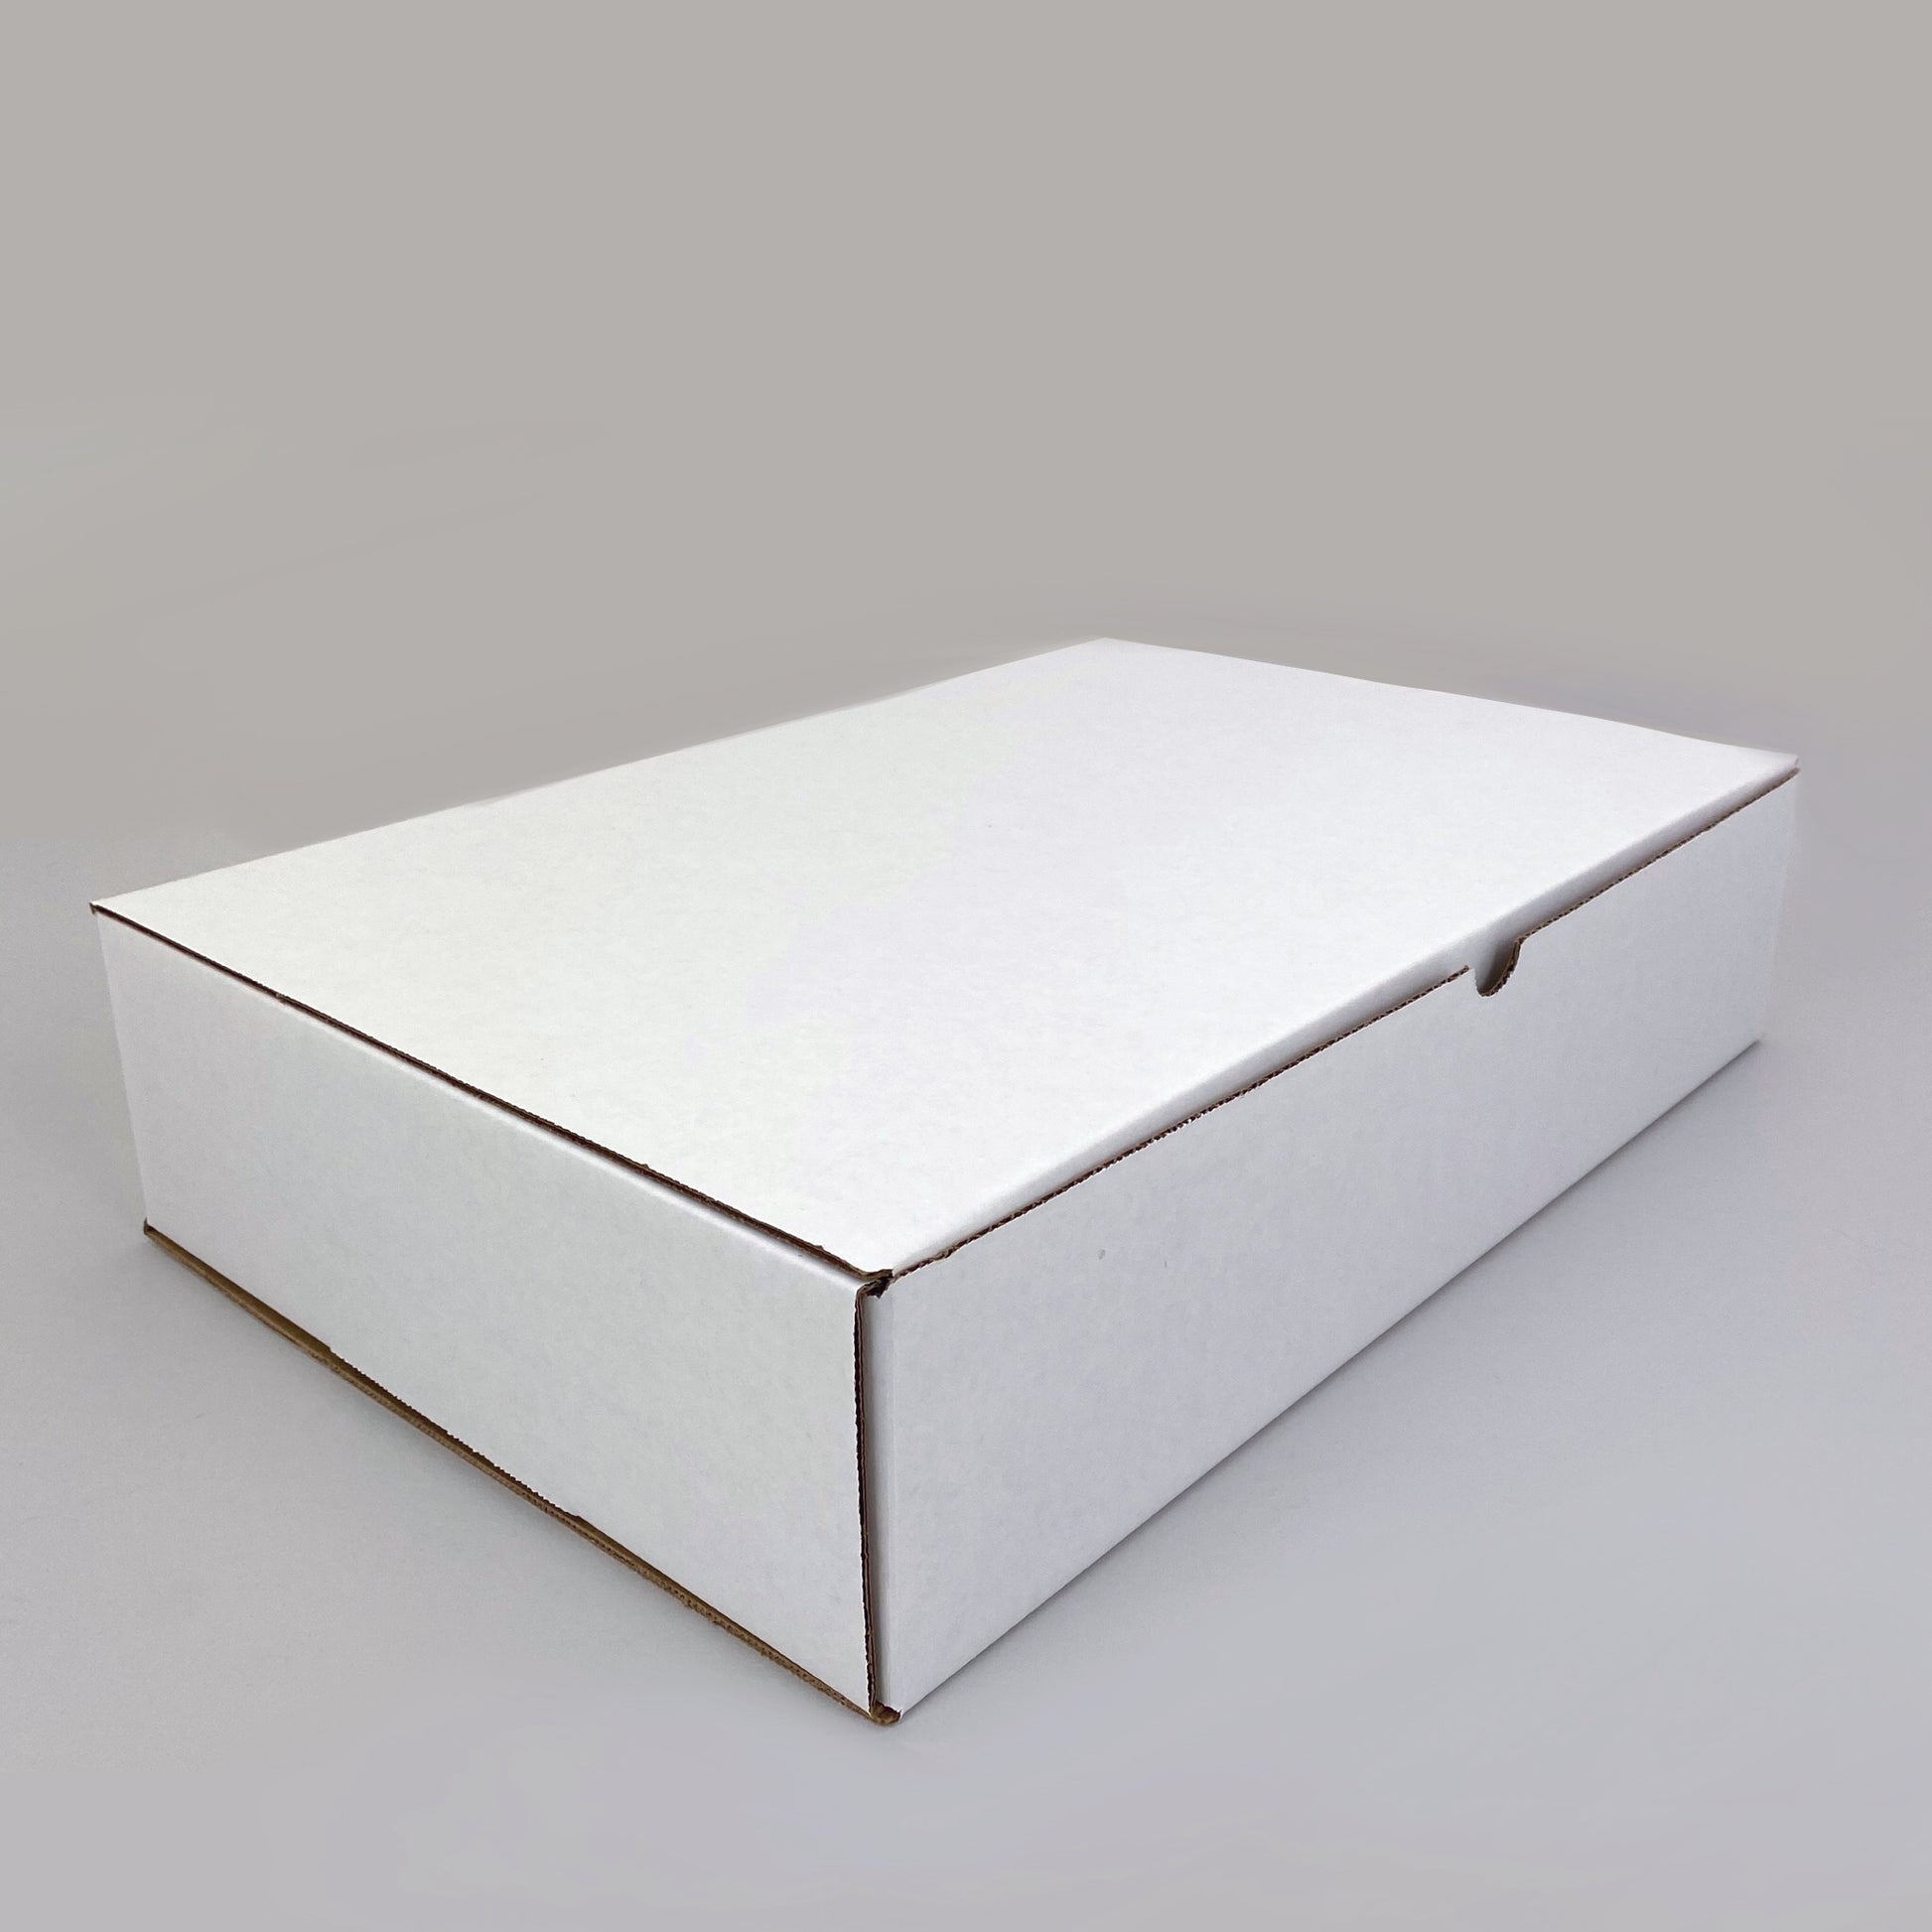 White Cardboard Shipping Boxes - Medium / Large - 18 x 12 x 4 inches by ULINE - K. A. Artist Shop